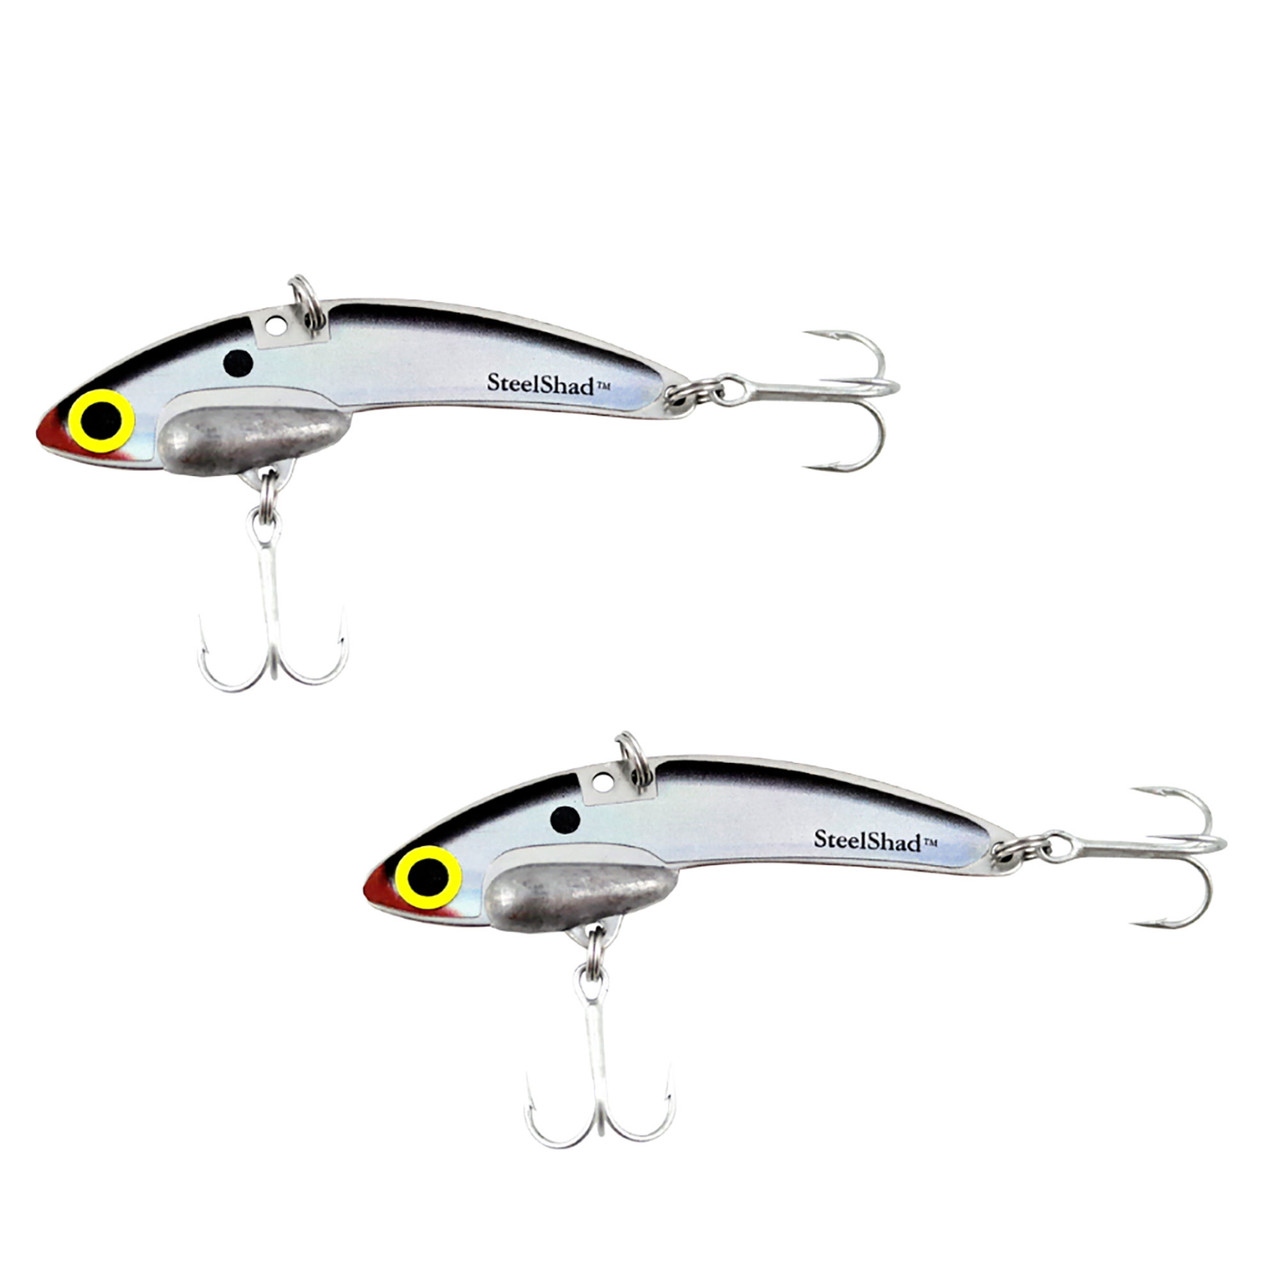  Northland Tackle Rippin Shad Fishing Hook - Freshwater  Fishing Lure For Bass, Walleye, Trout, Crappie, & Others - The Perfect Bait  In Any Kit